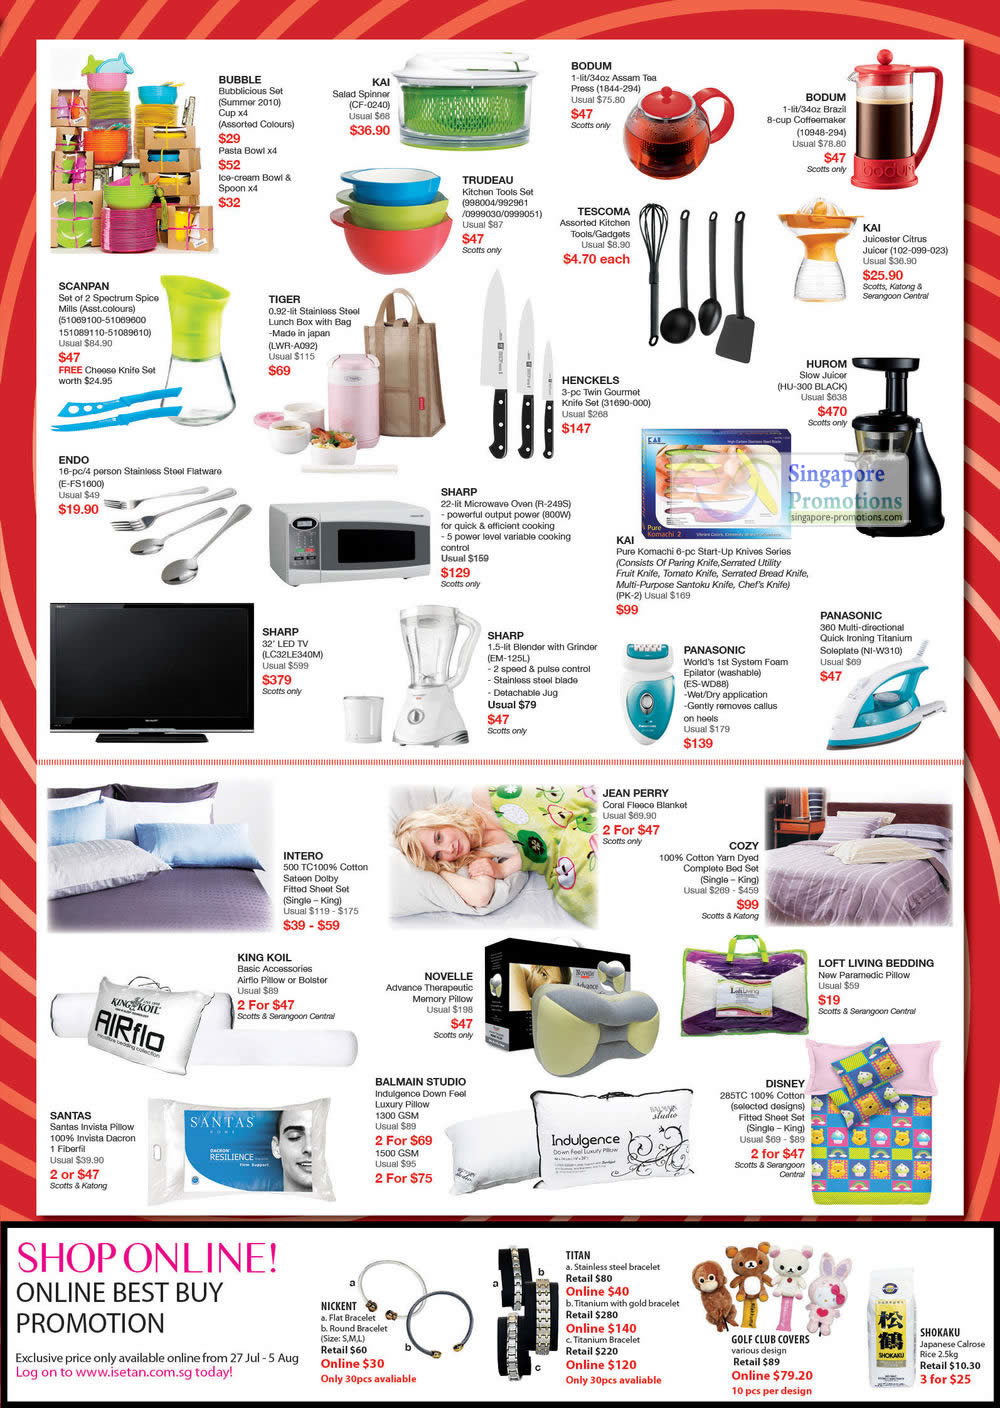 Featured image for Isetan National Day Household Promotion 8 - 12 Aug 2012